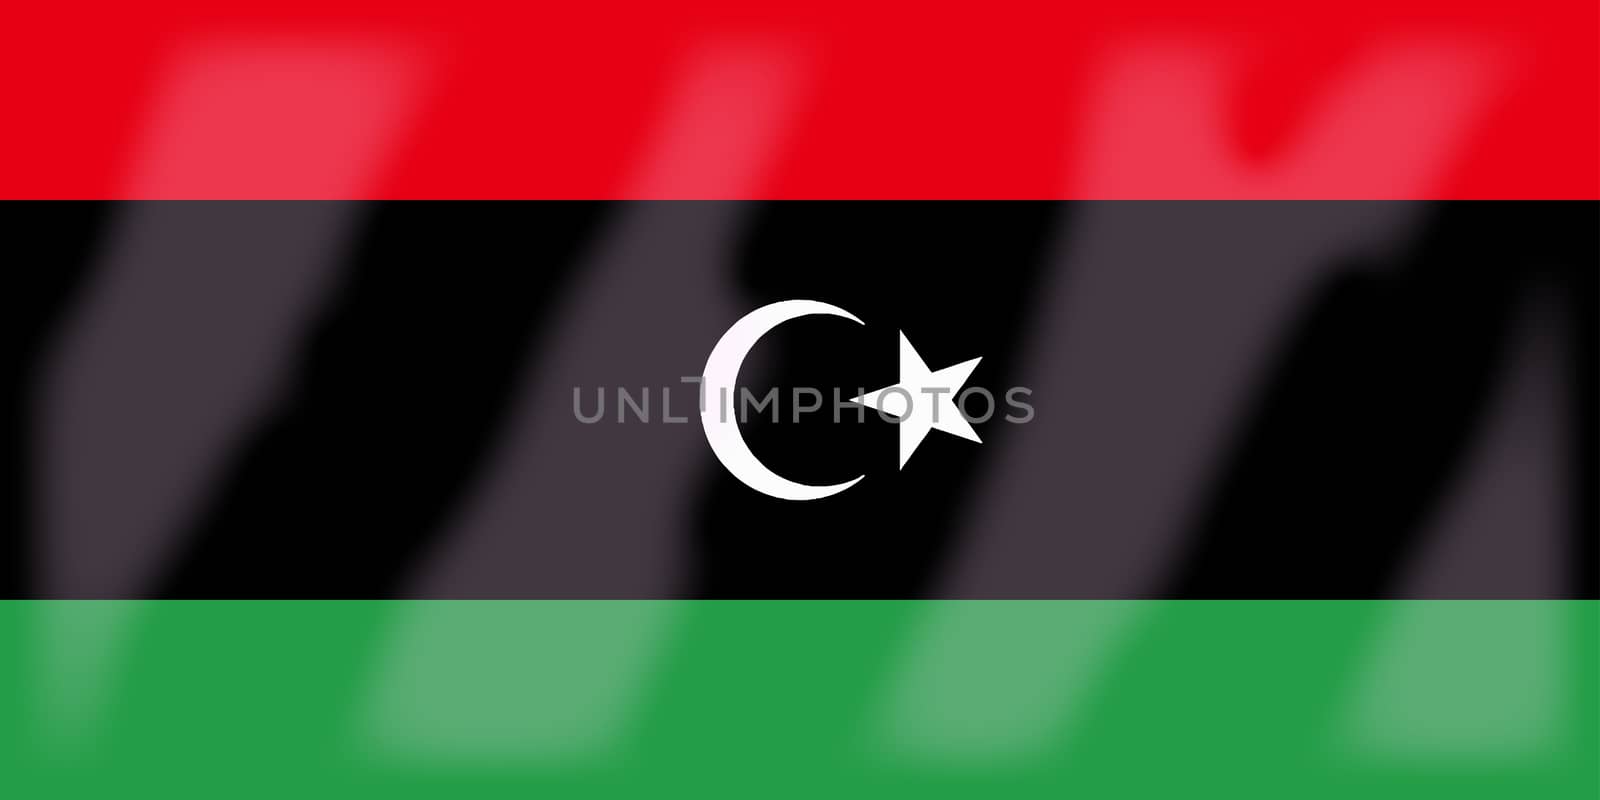 The flag of the African country of Libya